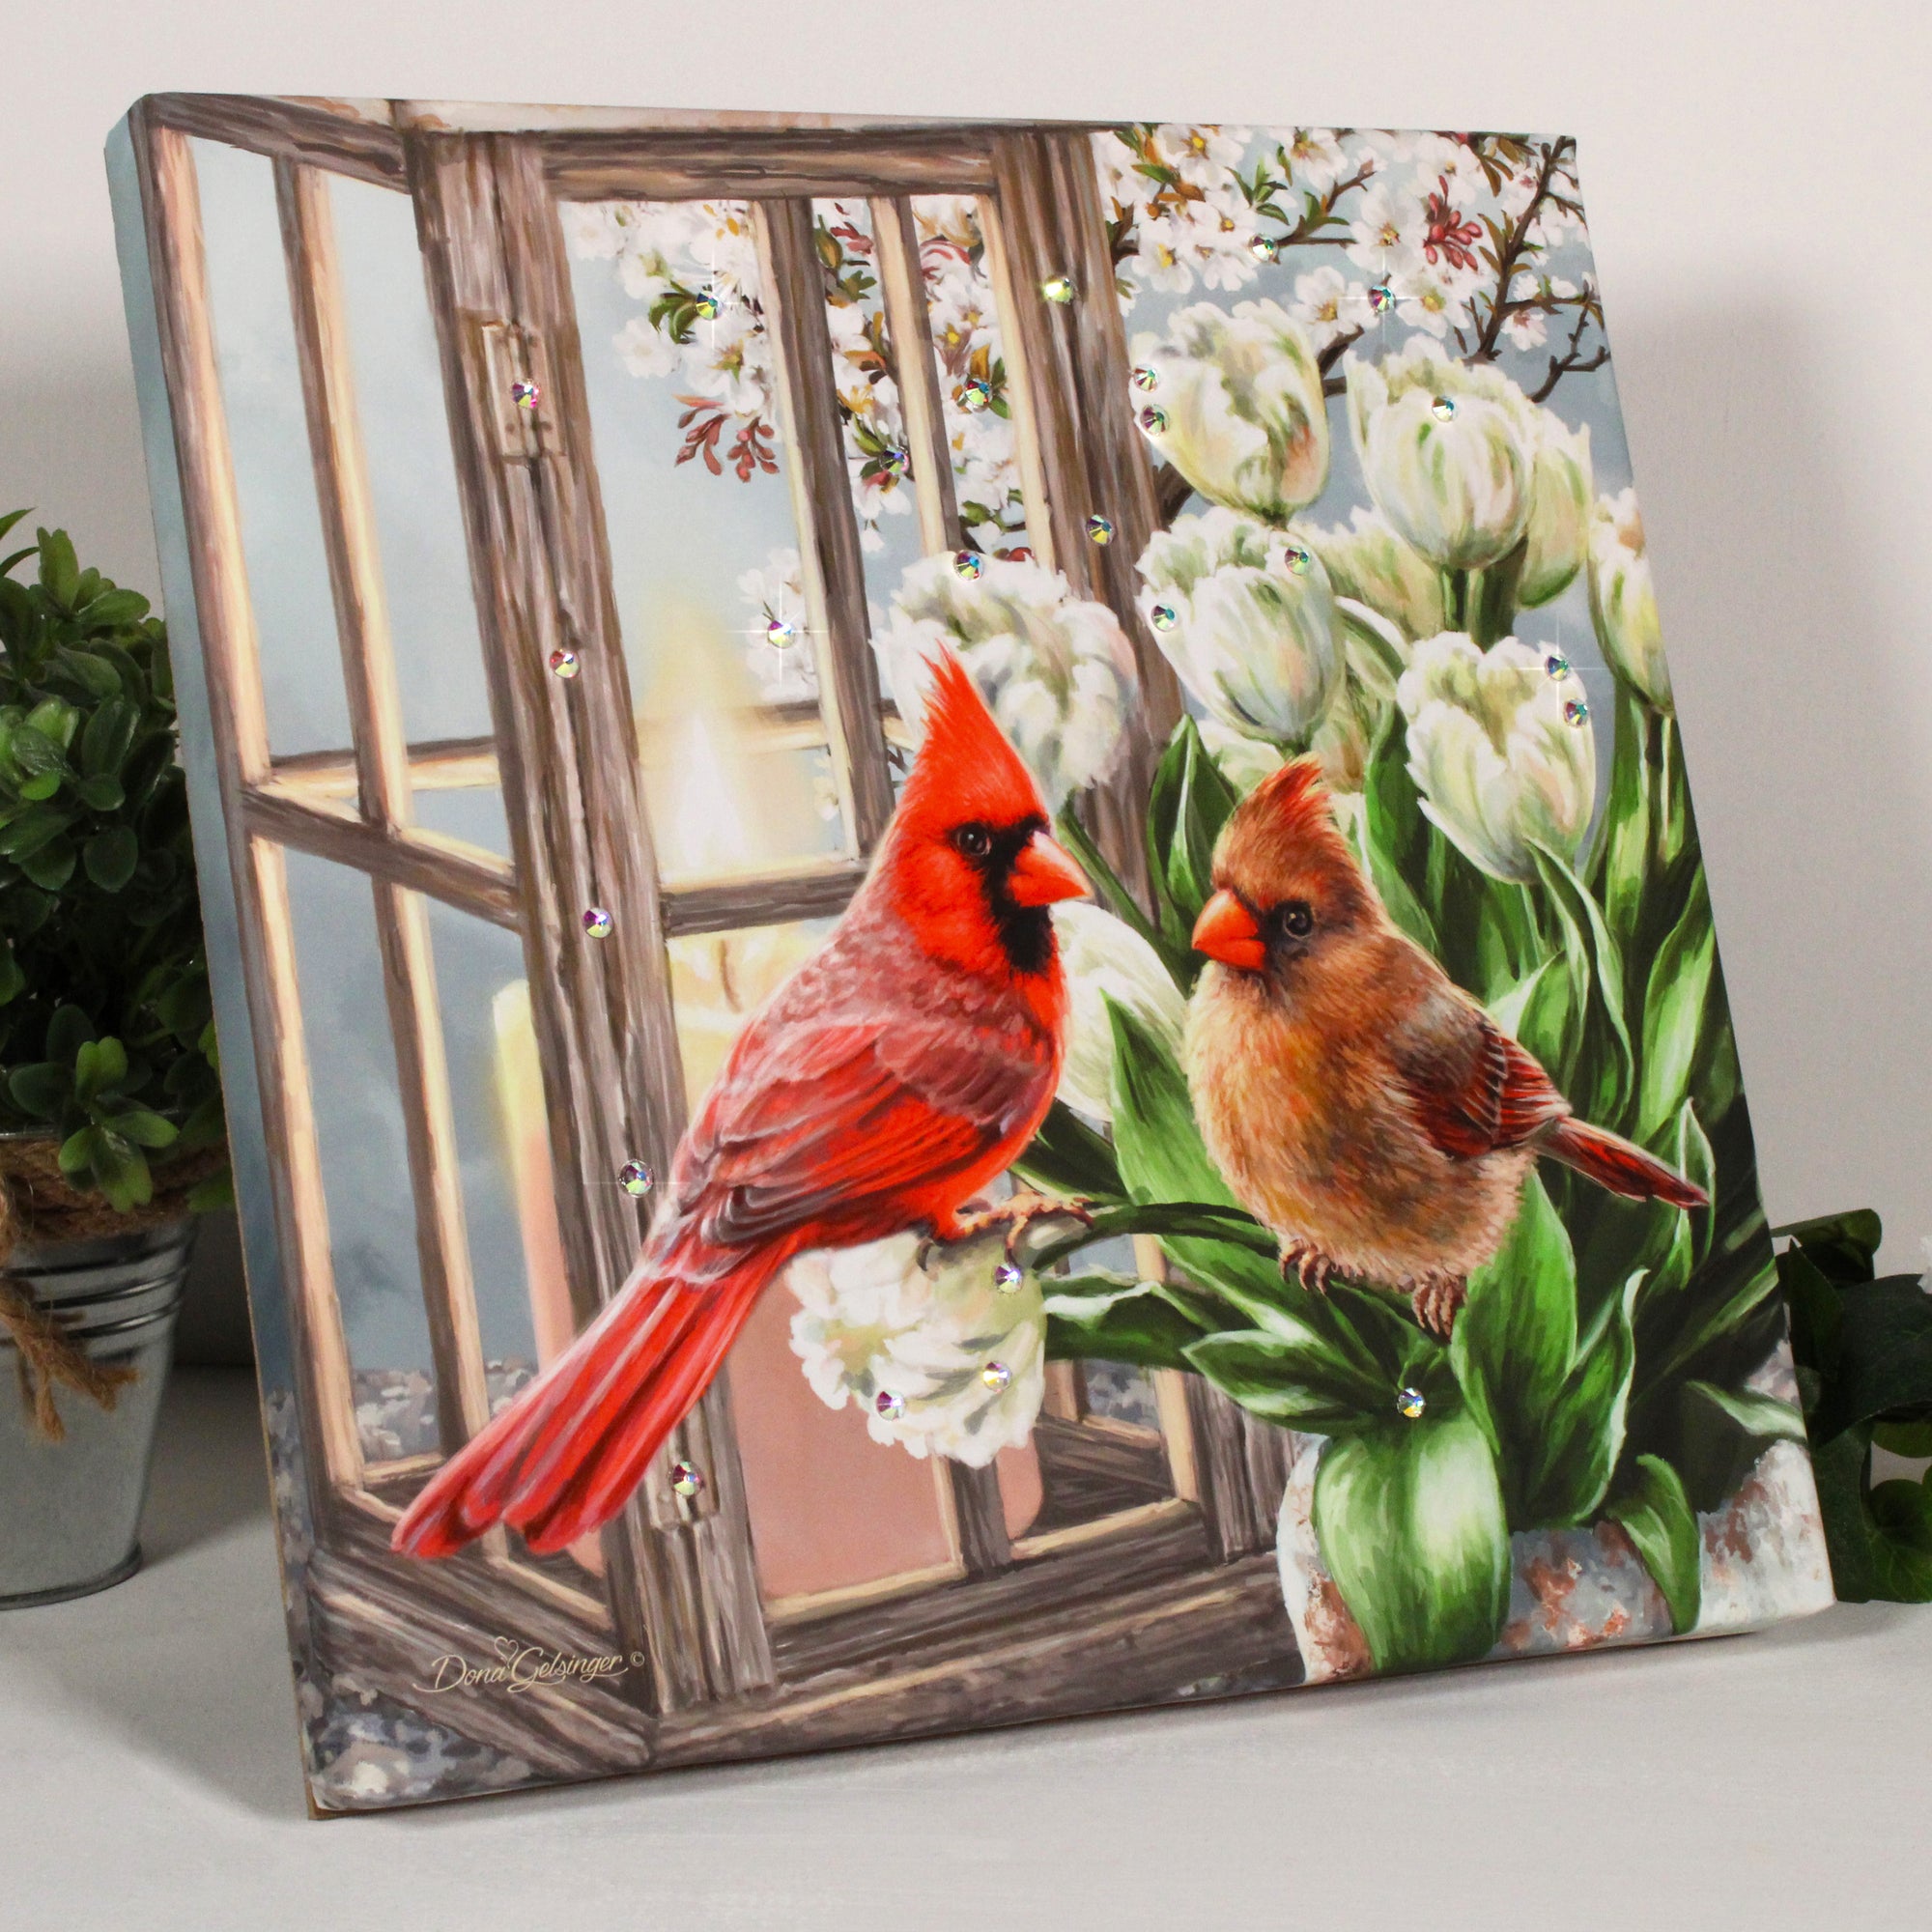 Two magnificent cardinals are perched on delicate white tulips, gazing into each other's eyes with a sense of pure adoration. The sparkling crystals add a touch of glamour and elegance, making this artwork a true feast for the eyes.